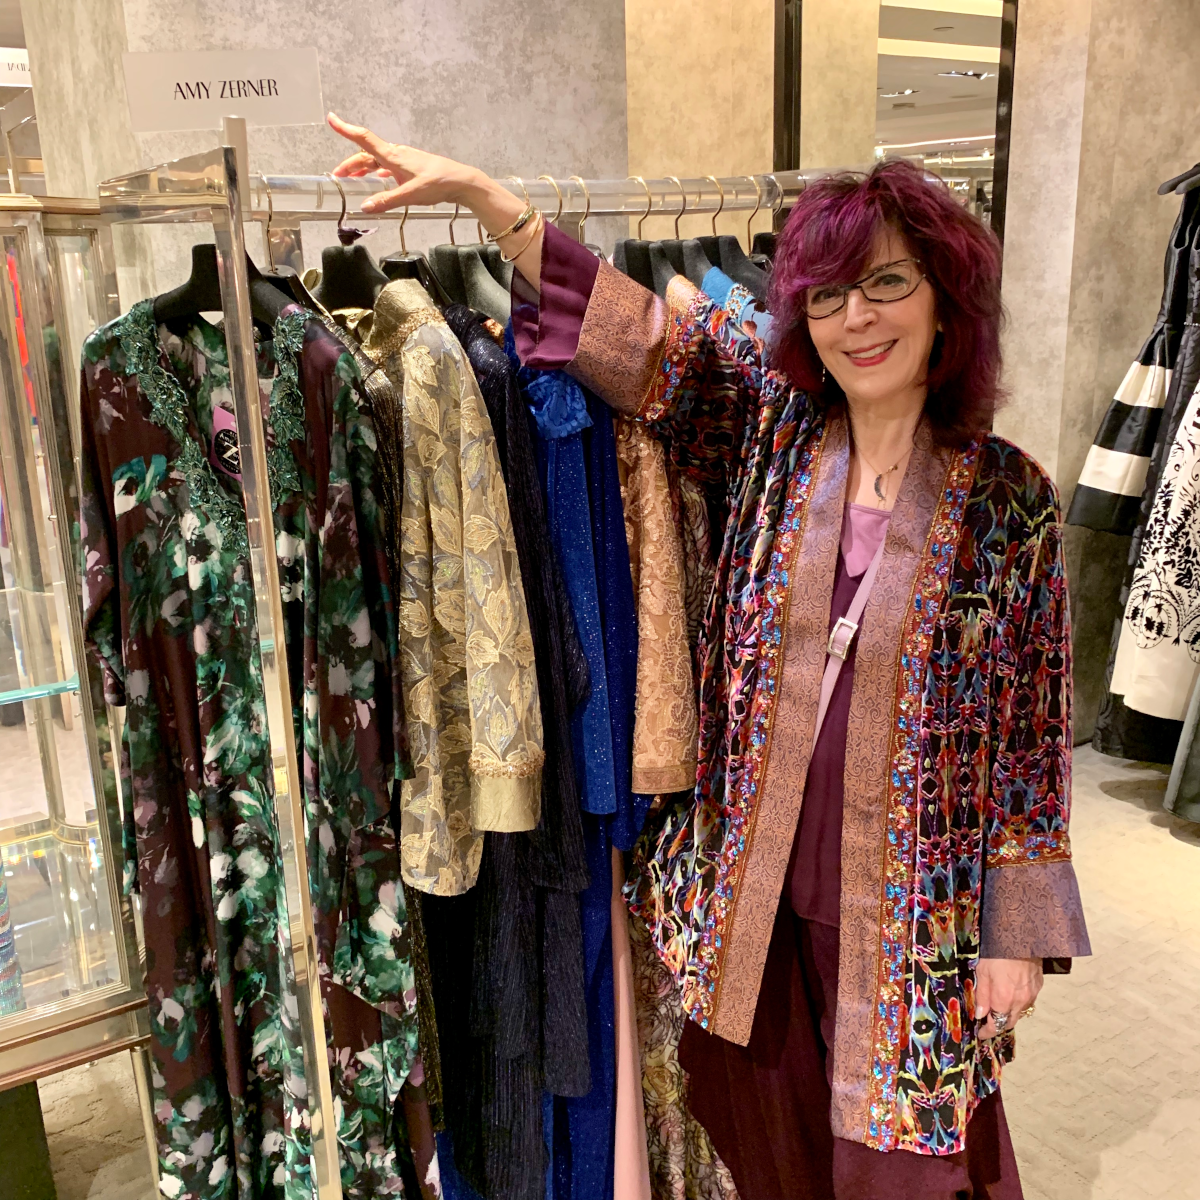 Amy Zerner with rack of her designs